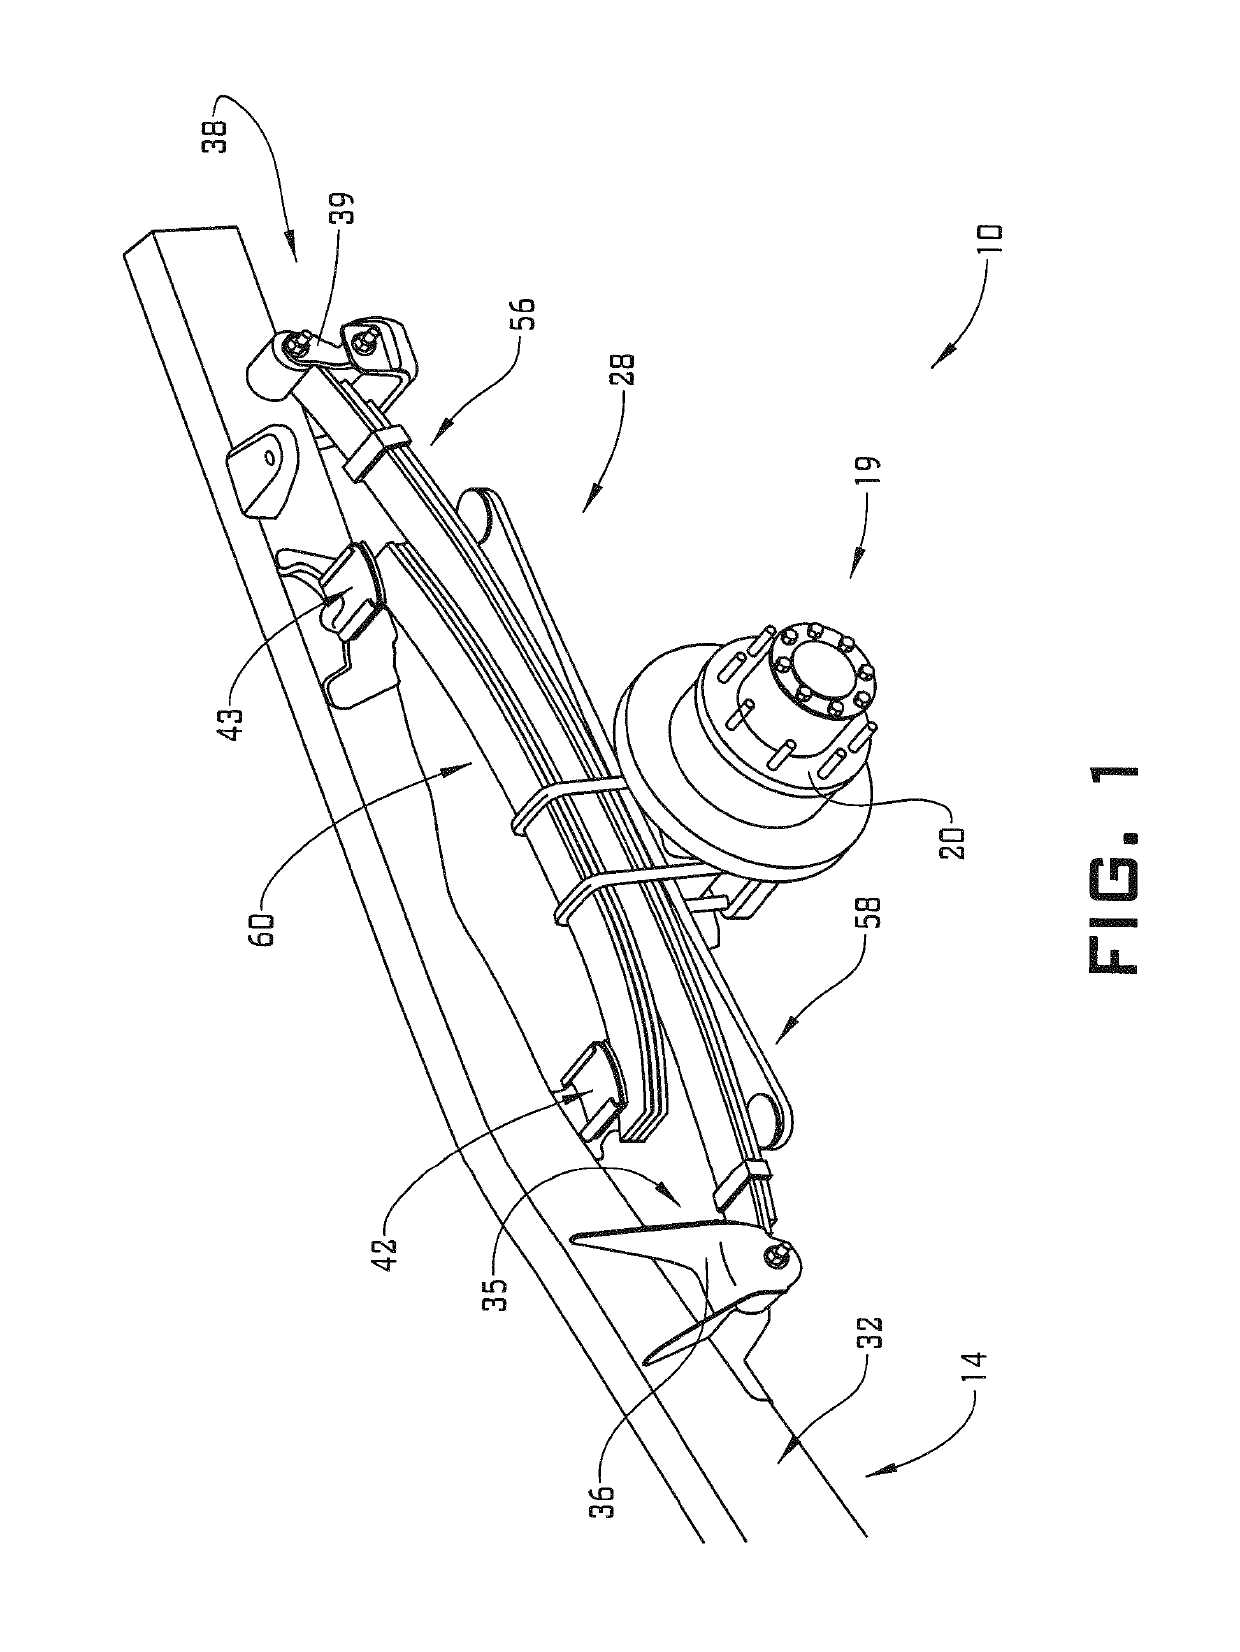 Reinforcement plate for an auxiliary state leaf pack of a leaf spring system